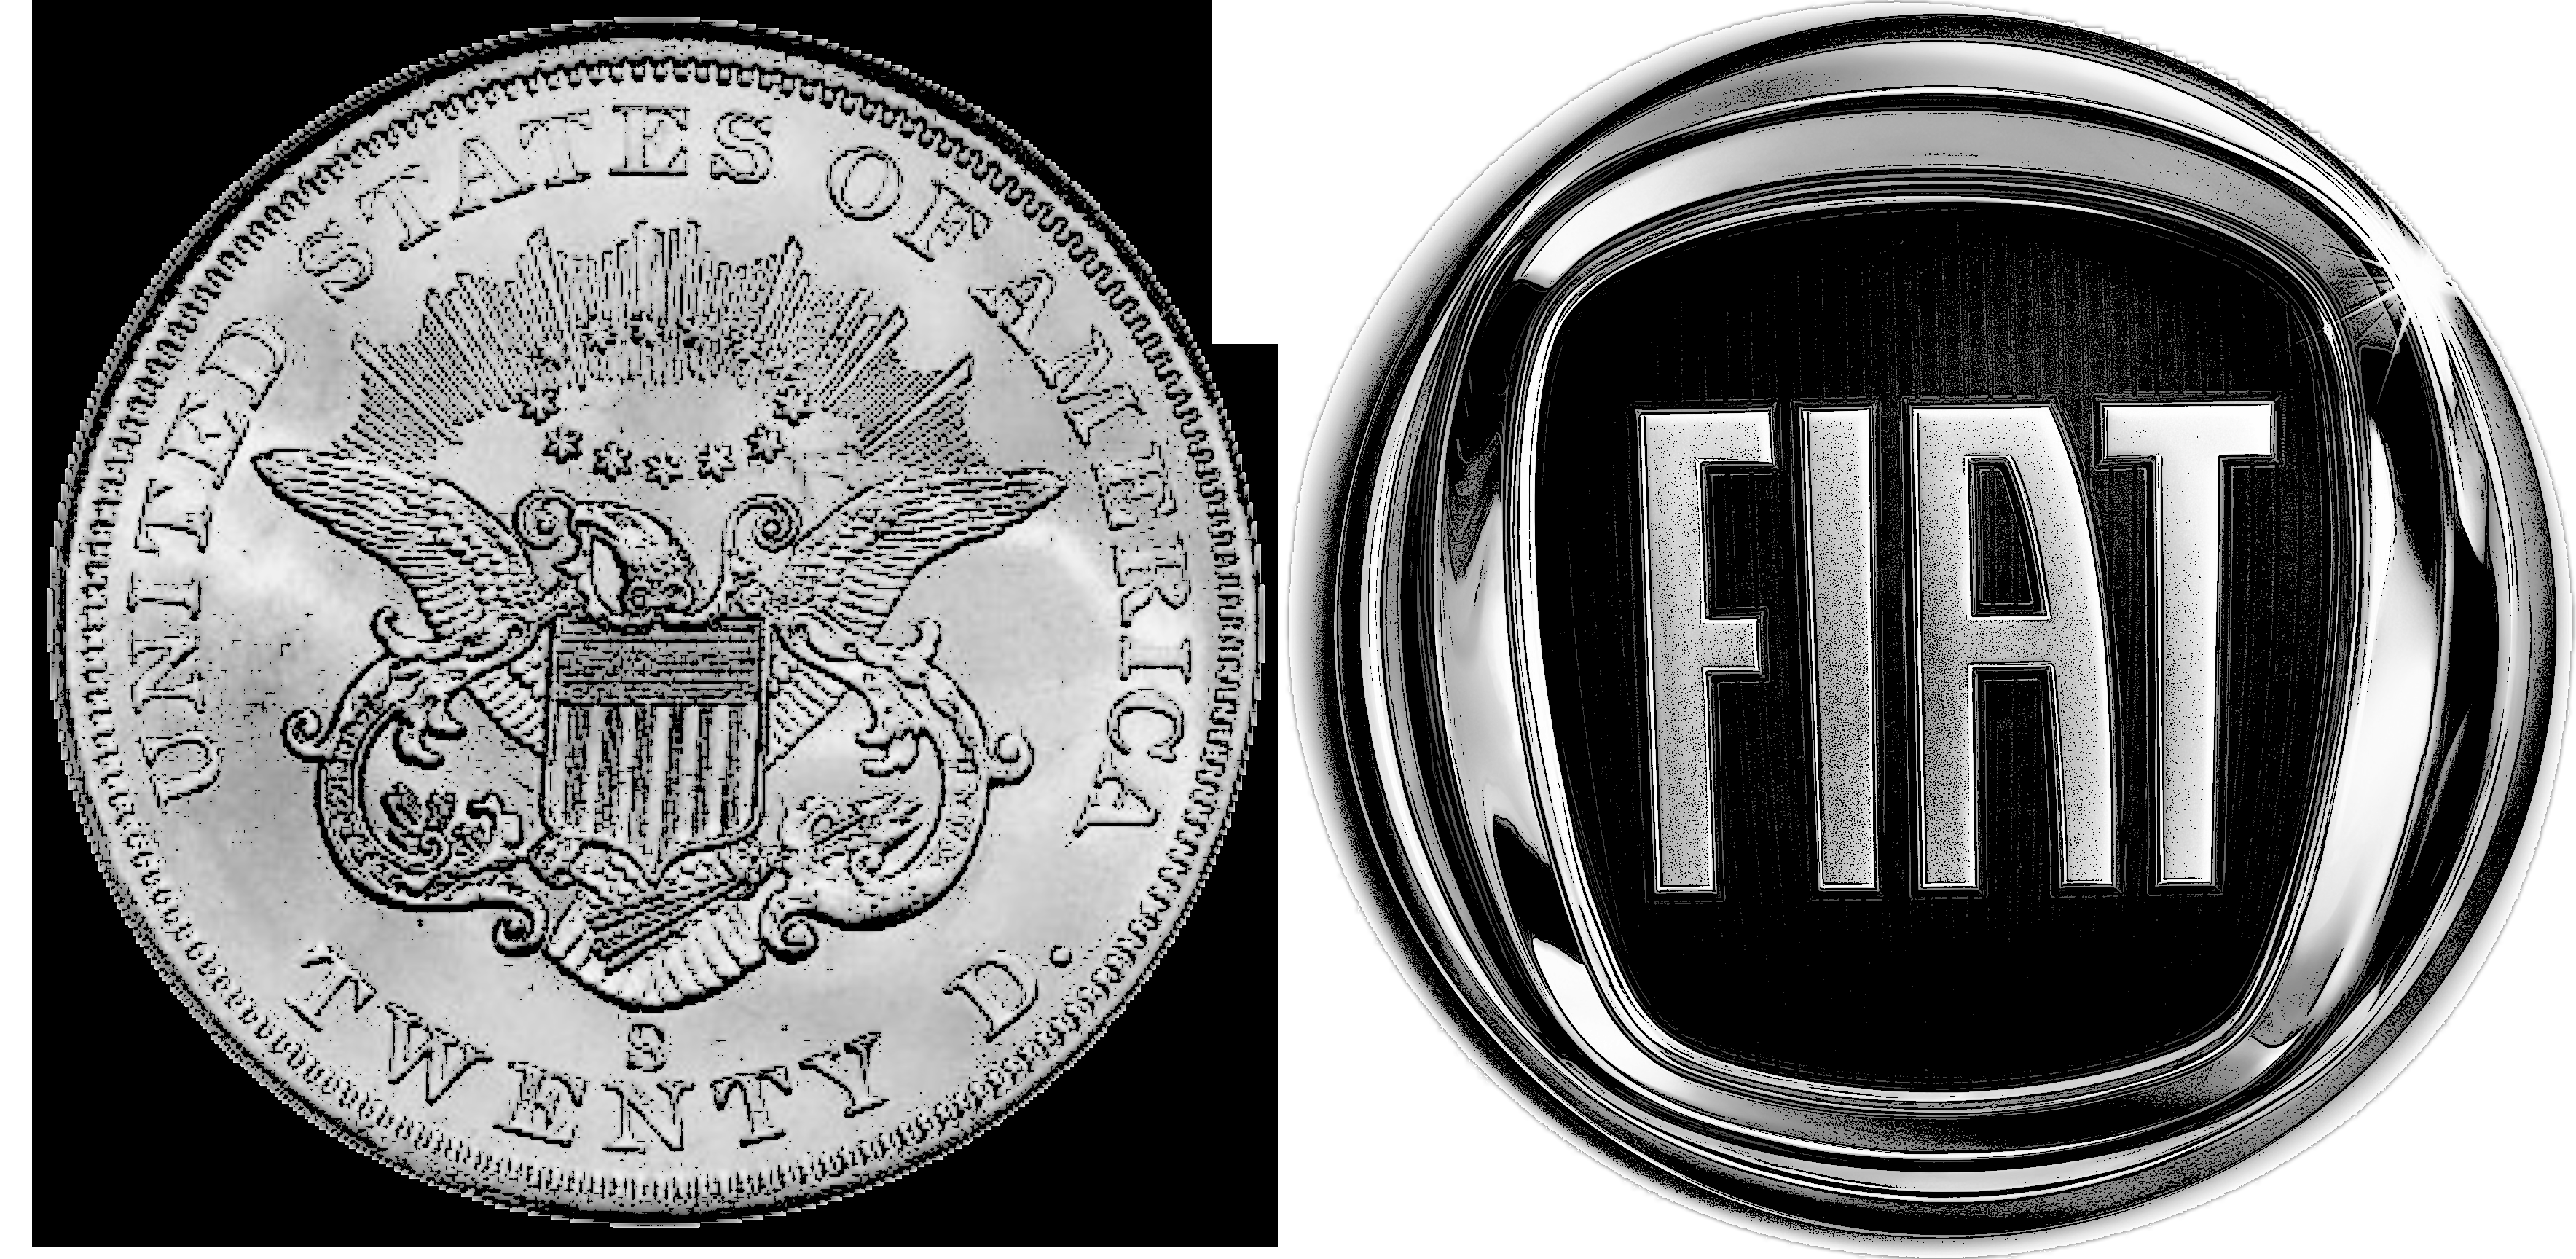 Figure 2.7: From Gold to Fiat® (© 2015 U.S. Department of Treasury and Fiat Chrysler Automobiles NV)